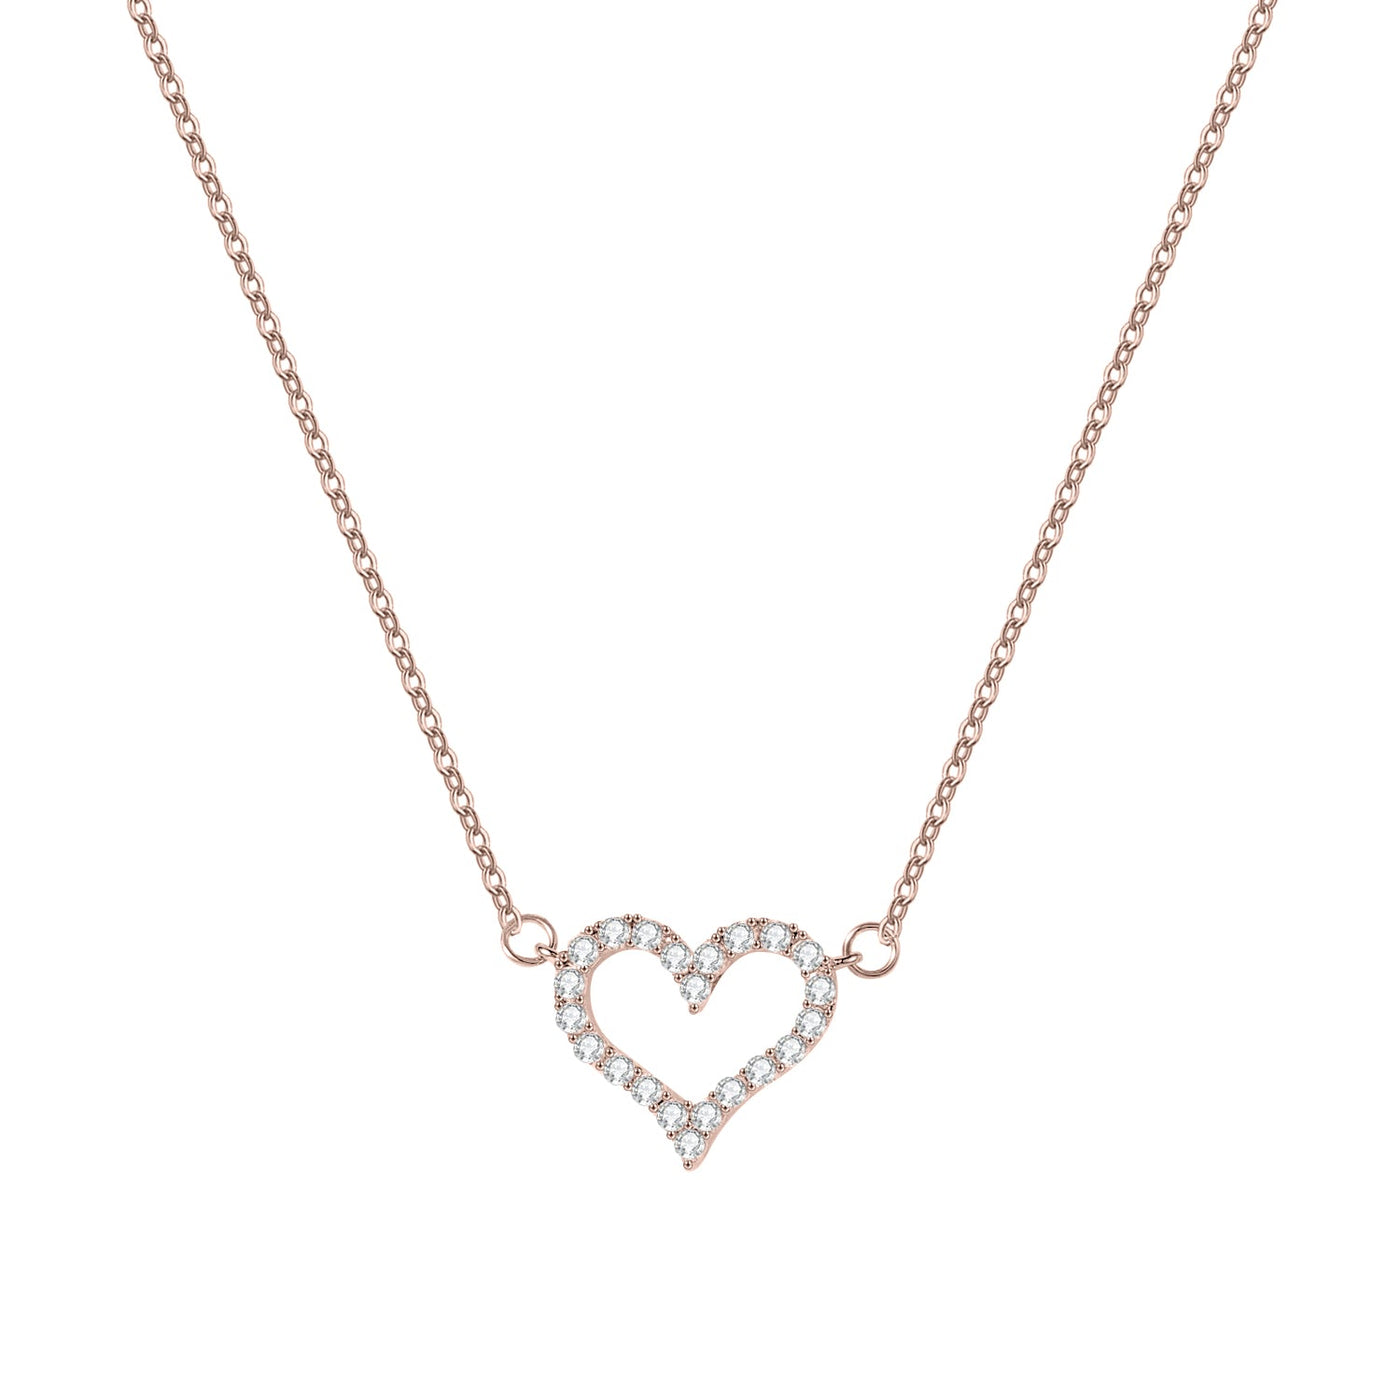 Gift for Friend - Love Heart Necklace - HouseofLx-18K Yellow Gold